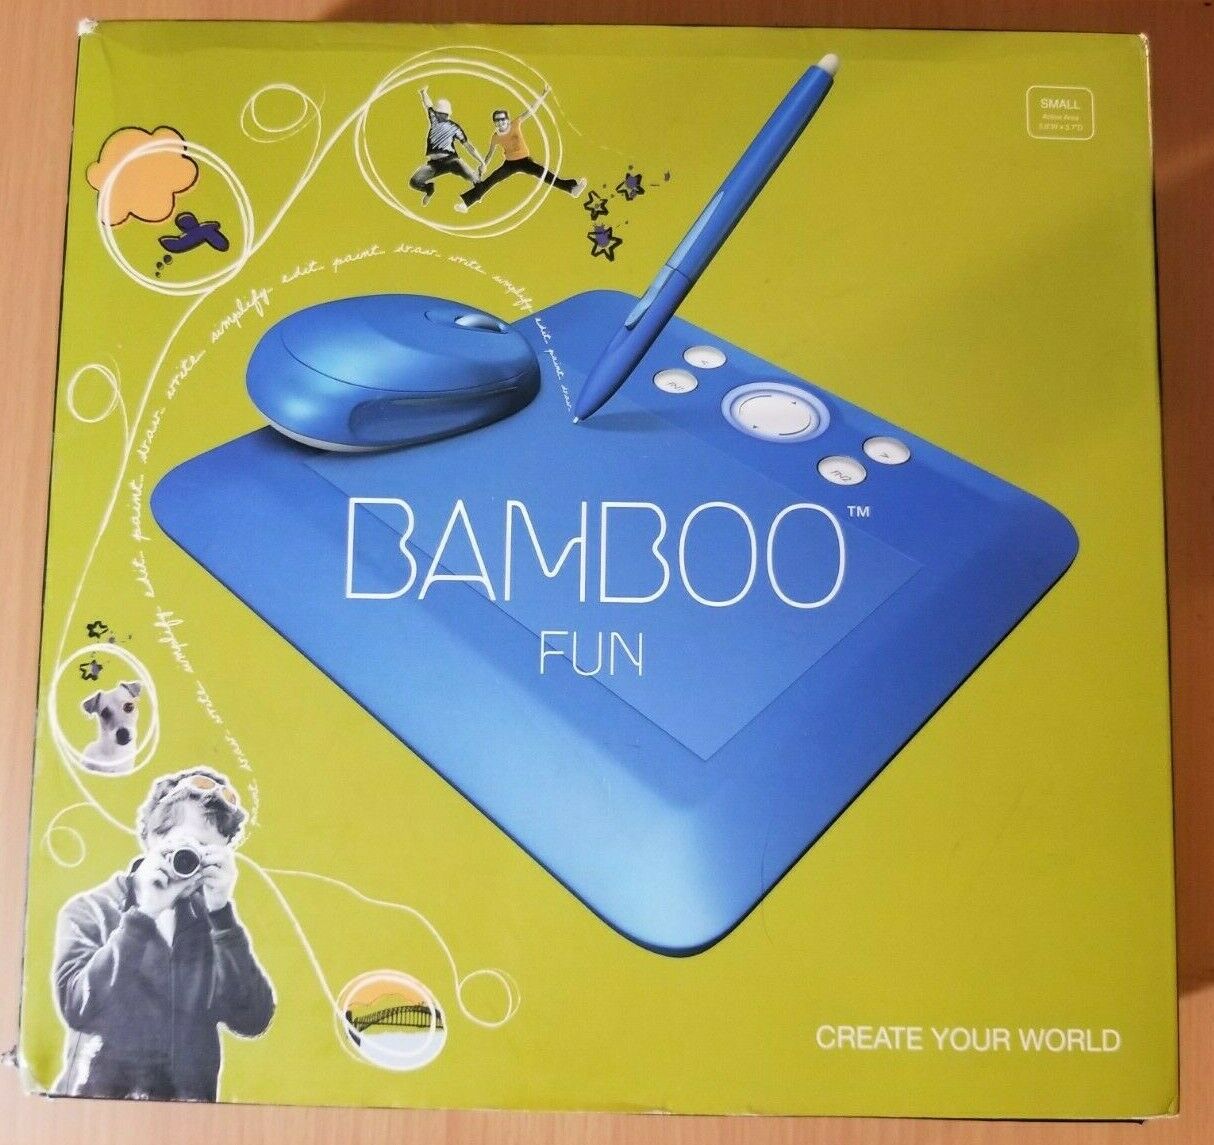 Bamboo Fun CTE450B drawing touch pen tablet complete w/ box